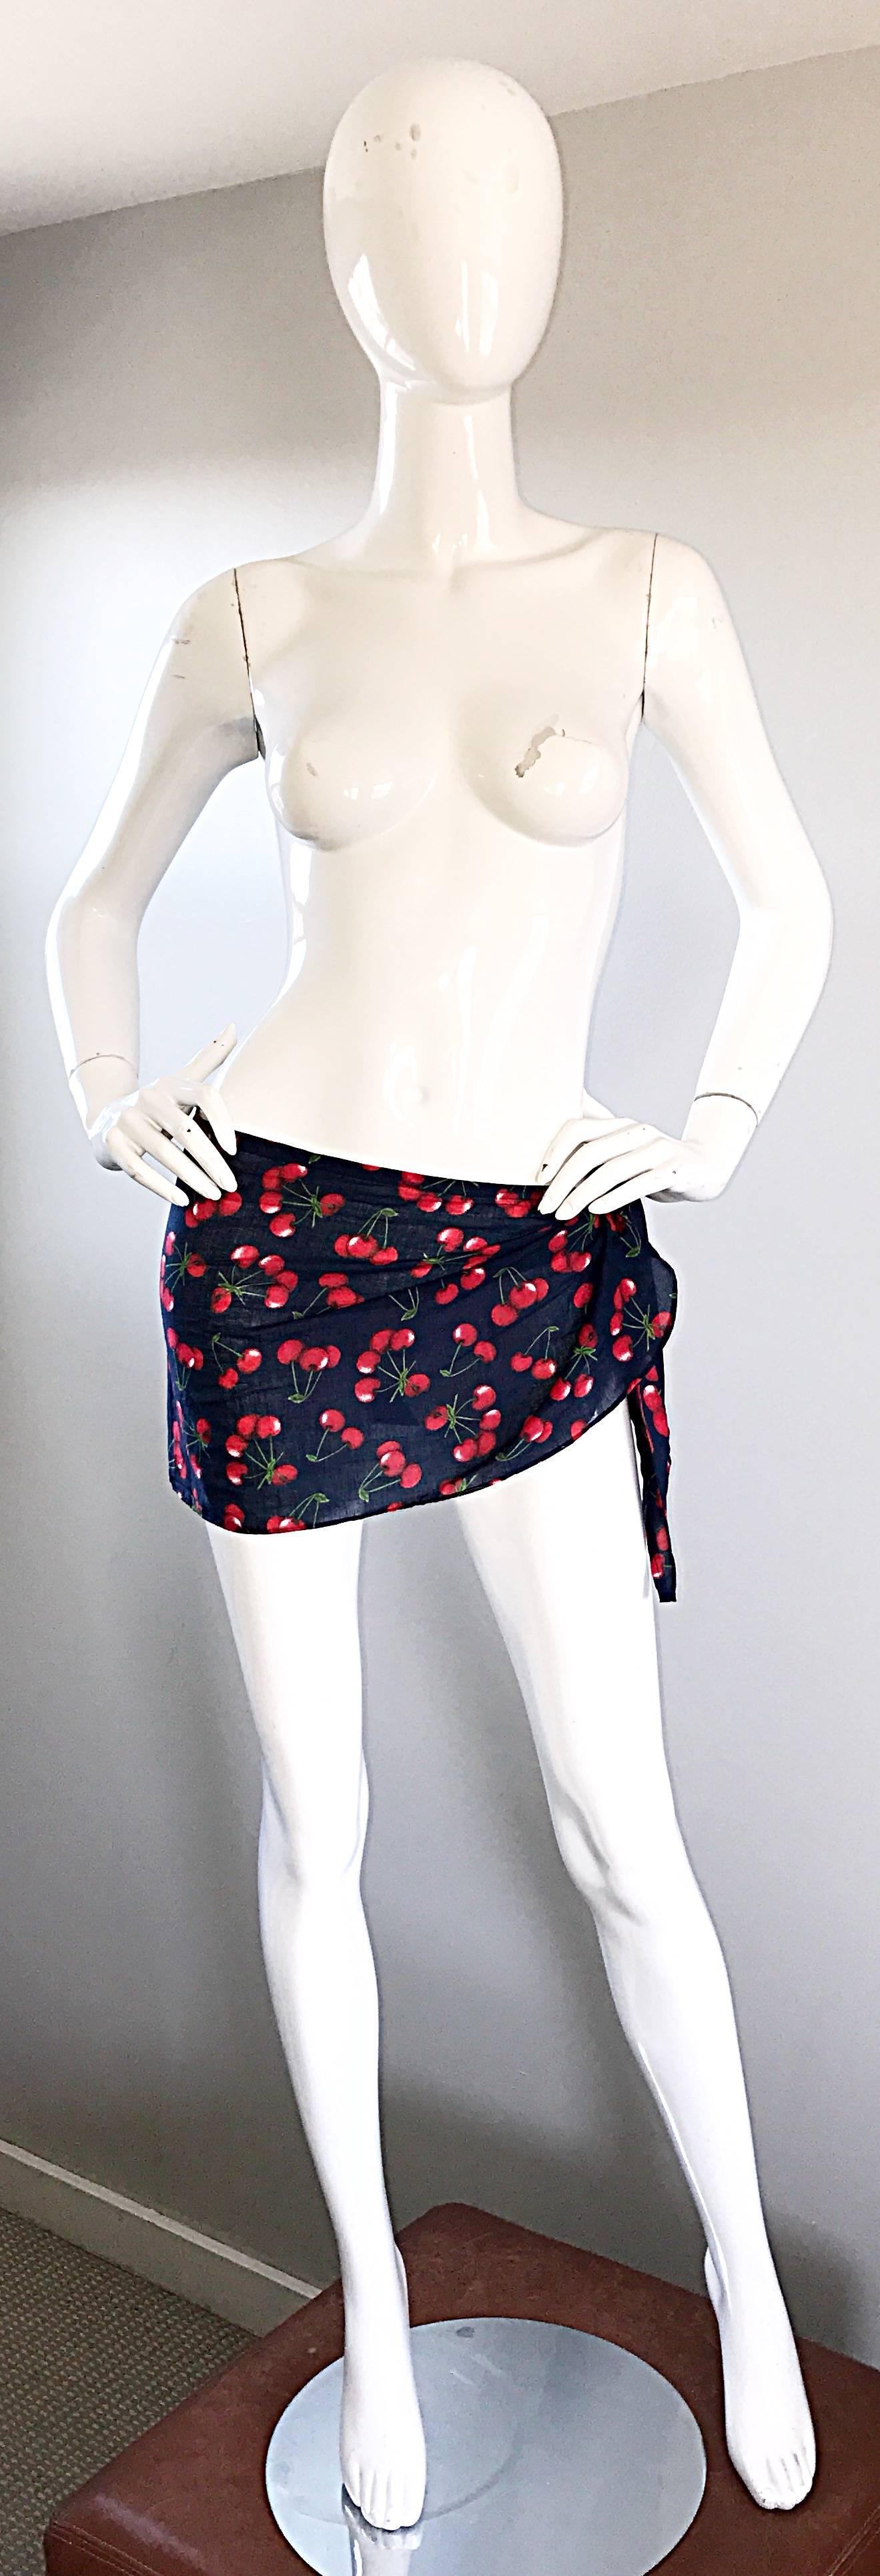 Sexy new with tags vintage 1990s DOLCE AND GABBANA black and red cherry print wrap skirt! The perfect cover up for the beach, pool or yacht. Lightweight cotton. TIes at the side of the waist, so can fit most sizes. In great unworn condition. Made in